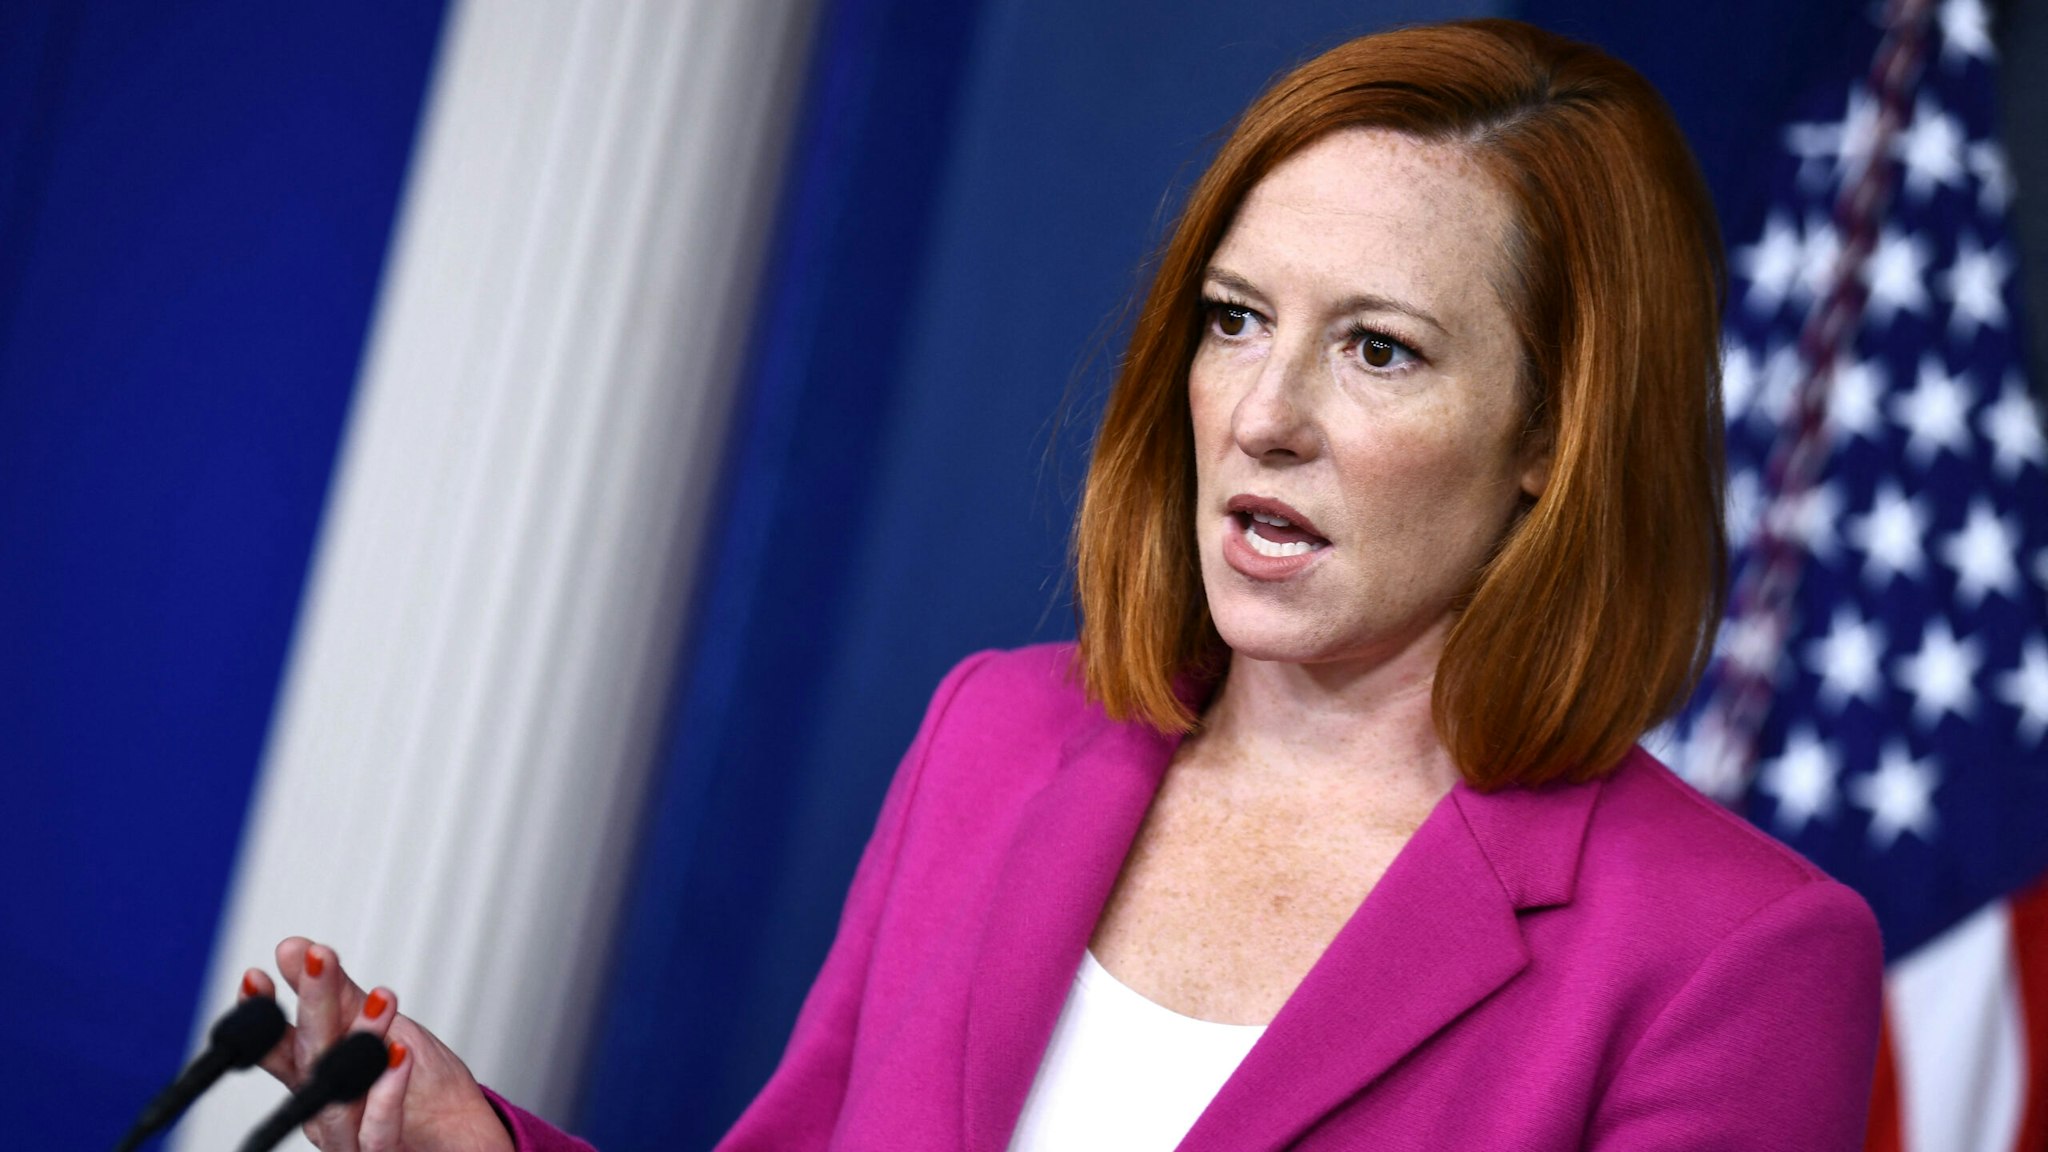 White House Press Secretary Jen Psaki holds a press briefing in the Brady Briefing Room of the White House in Washington, DC on August 4, 2021.